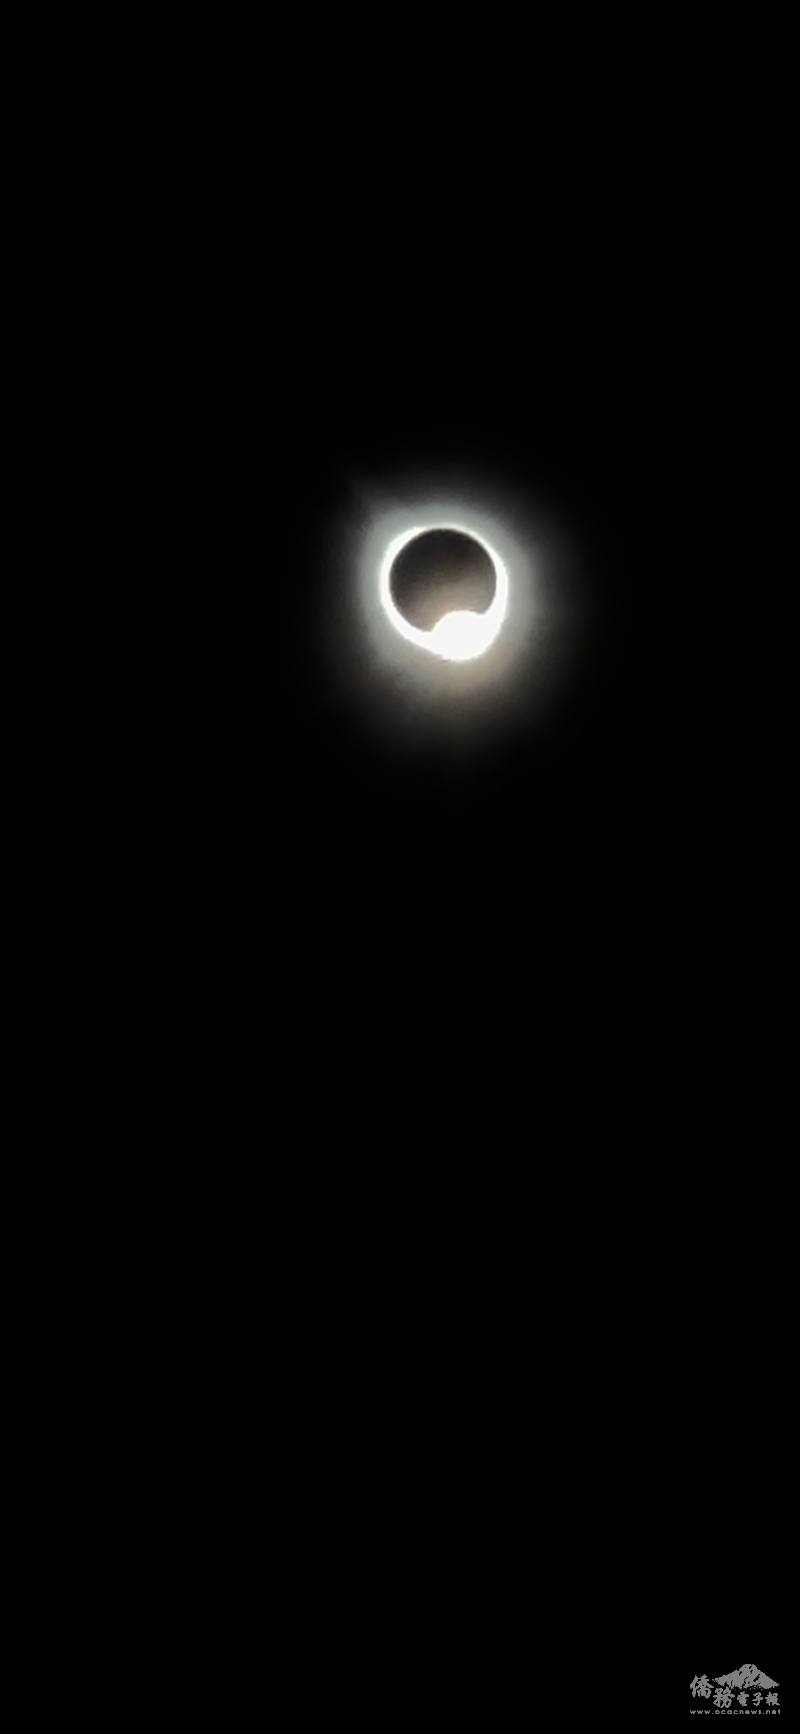 The enchanting moment: the diamond ring effect. This phenomenon happens as the last glimpse of the Sun vanishes before totality, and again when the Sun re-appears after the eclipse.